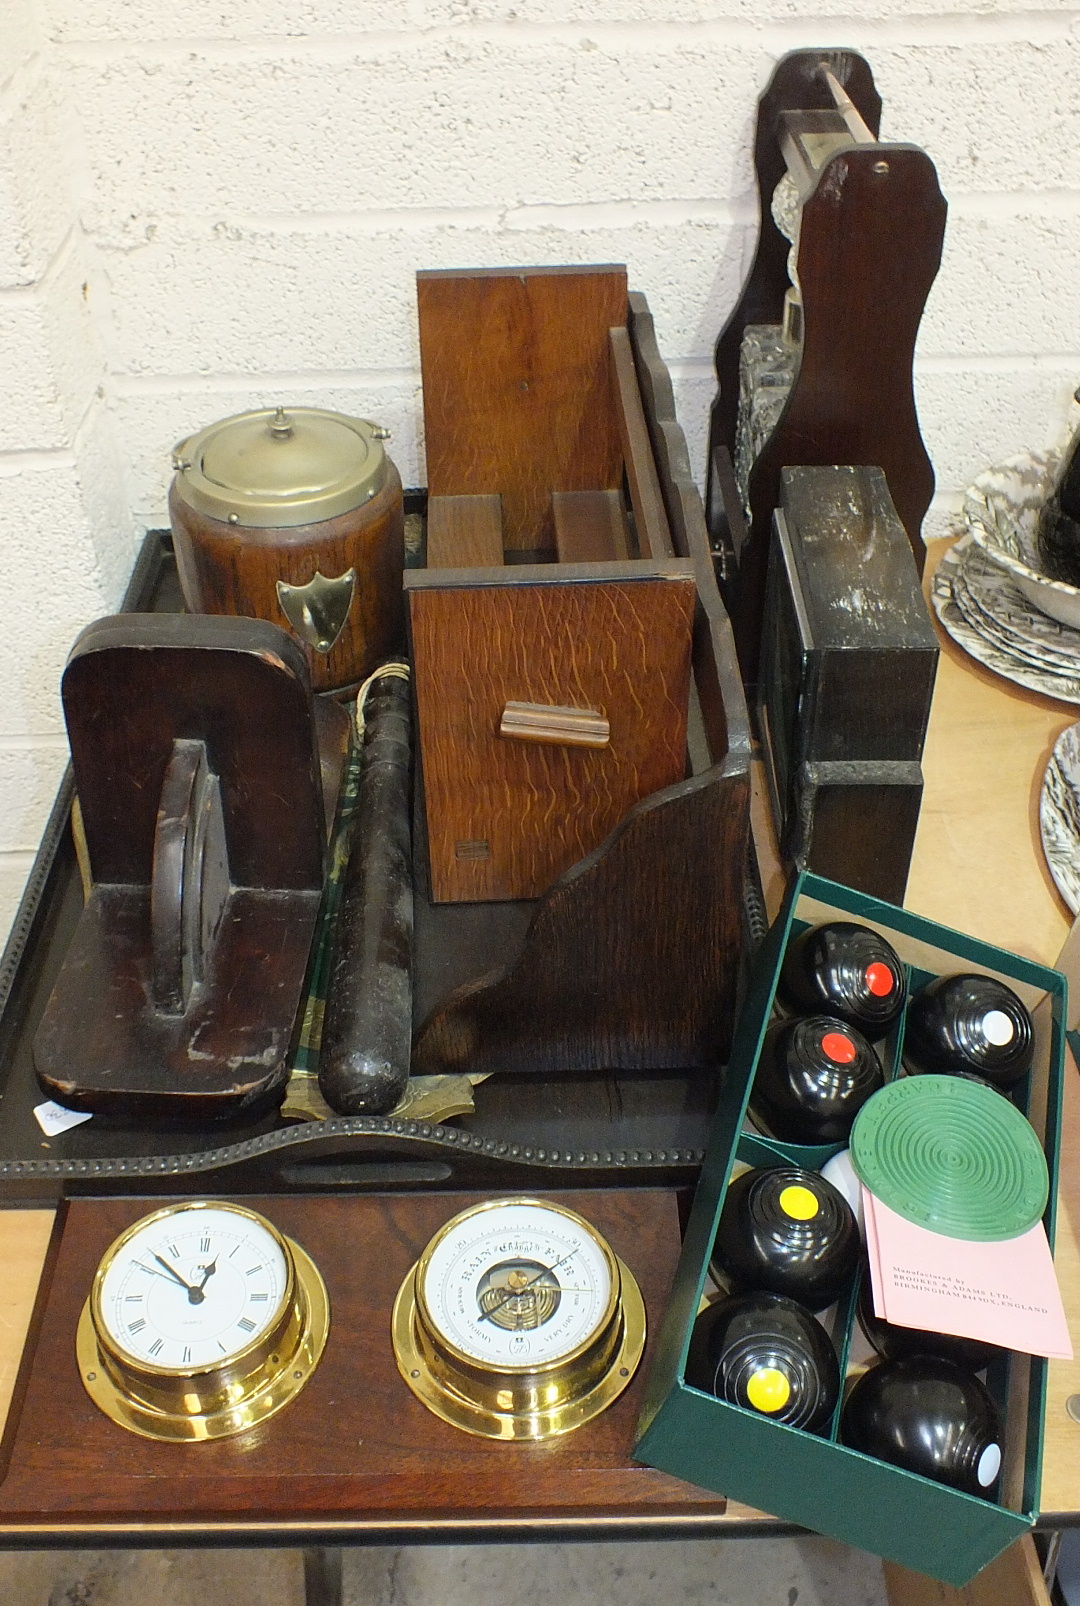 A wooden truncheon, a set of B&A carpet bowls, a modern two-bottle Tantalus and other wooden items.